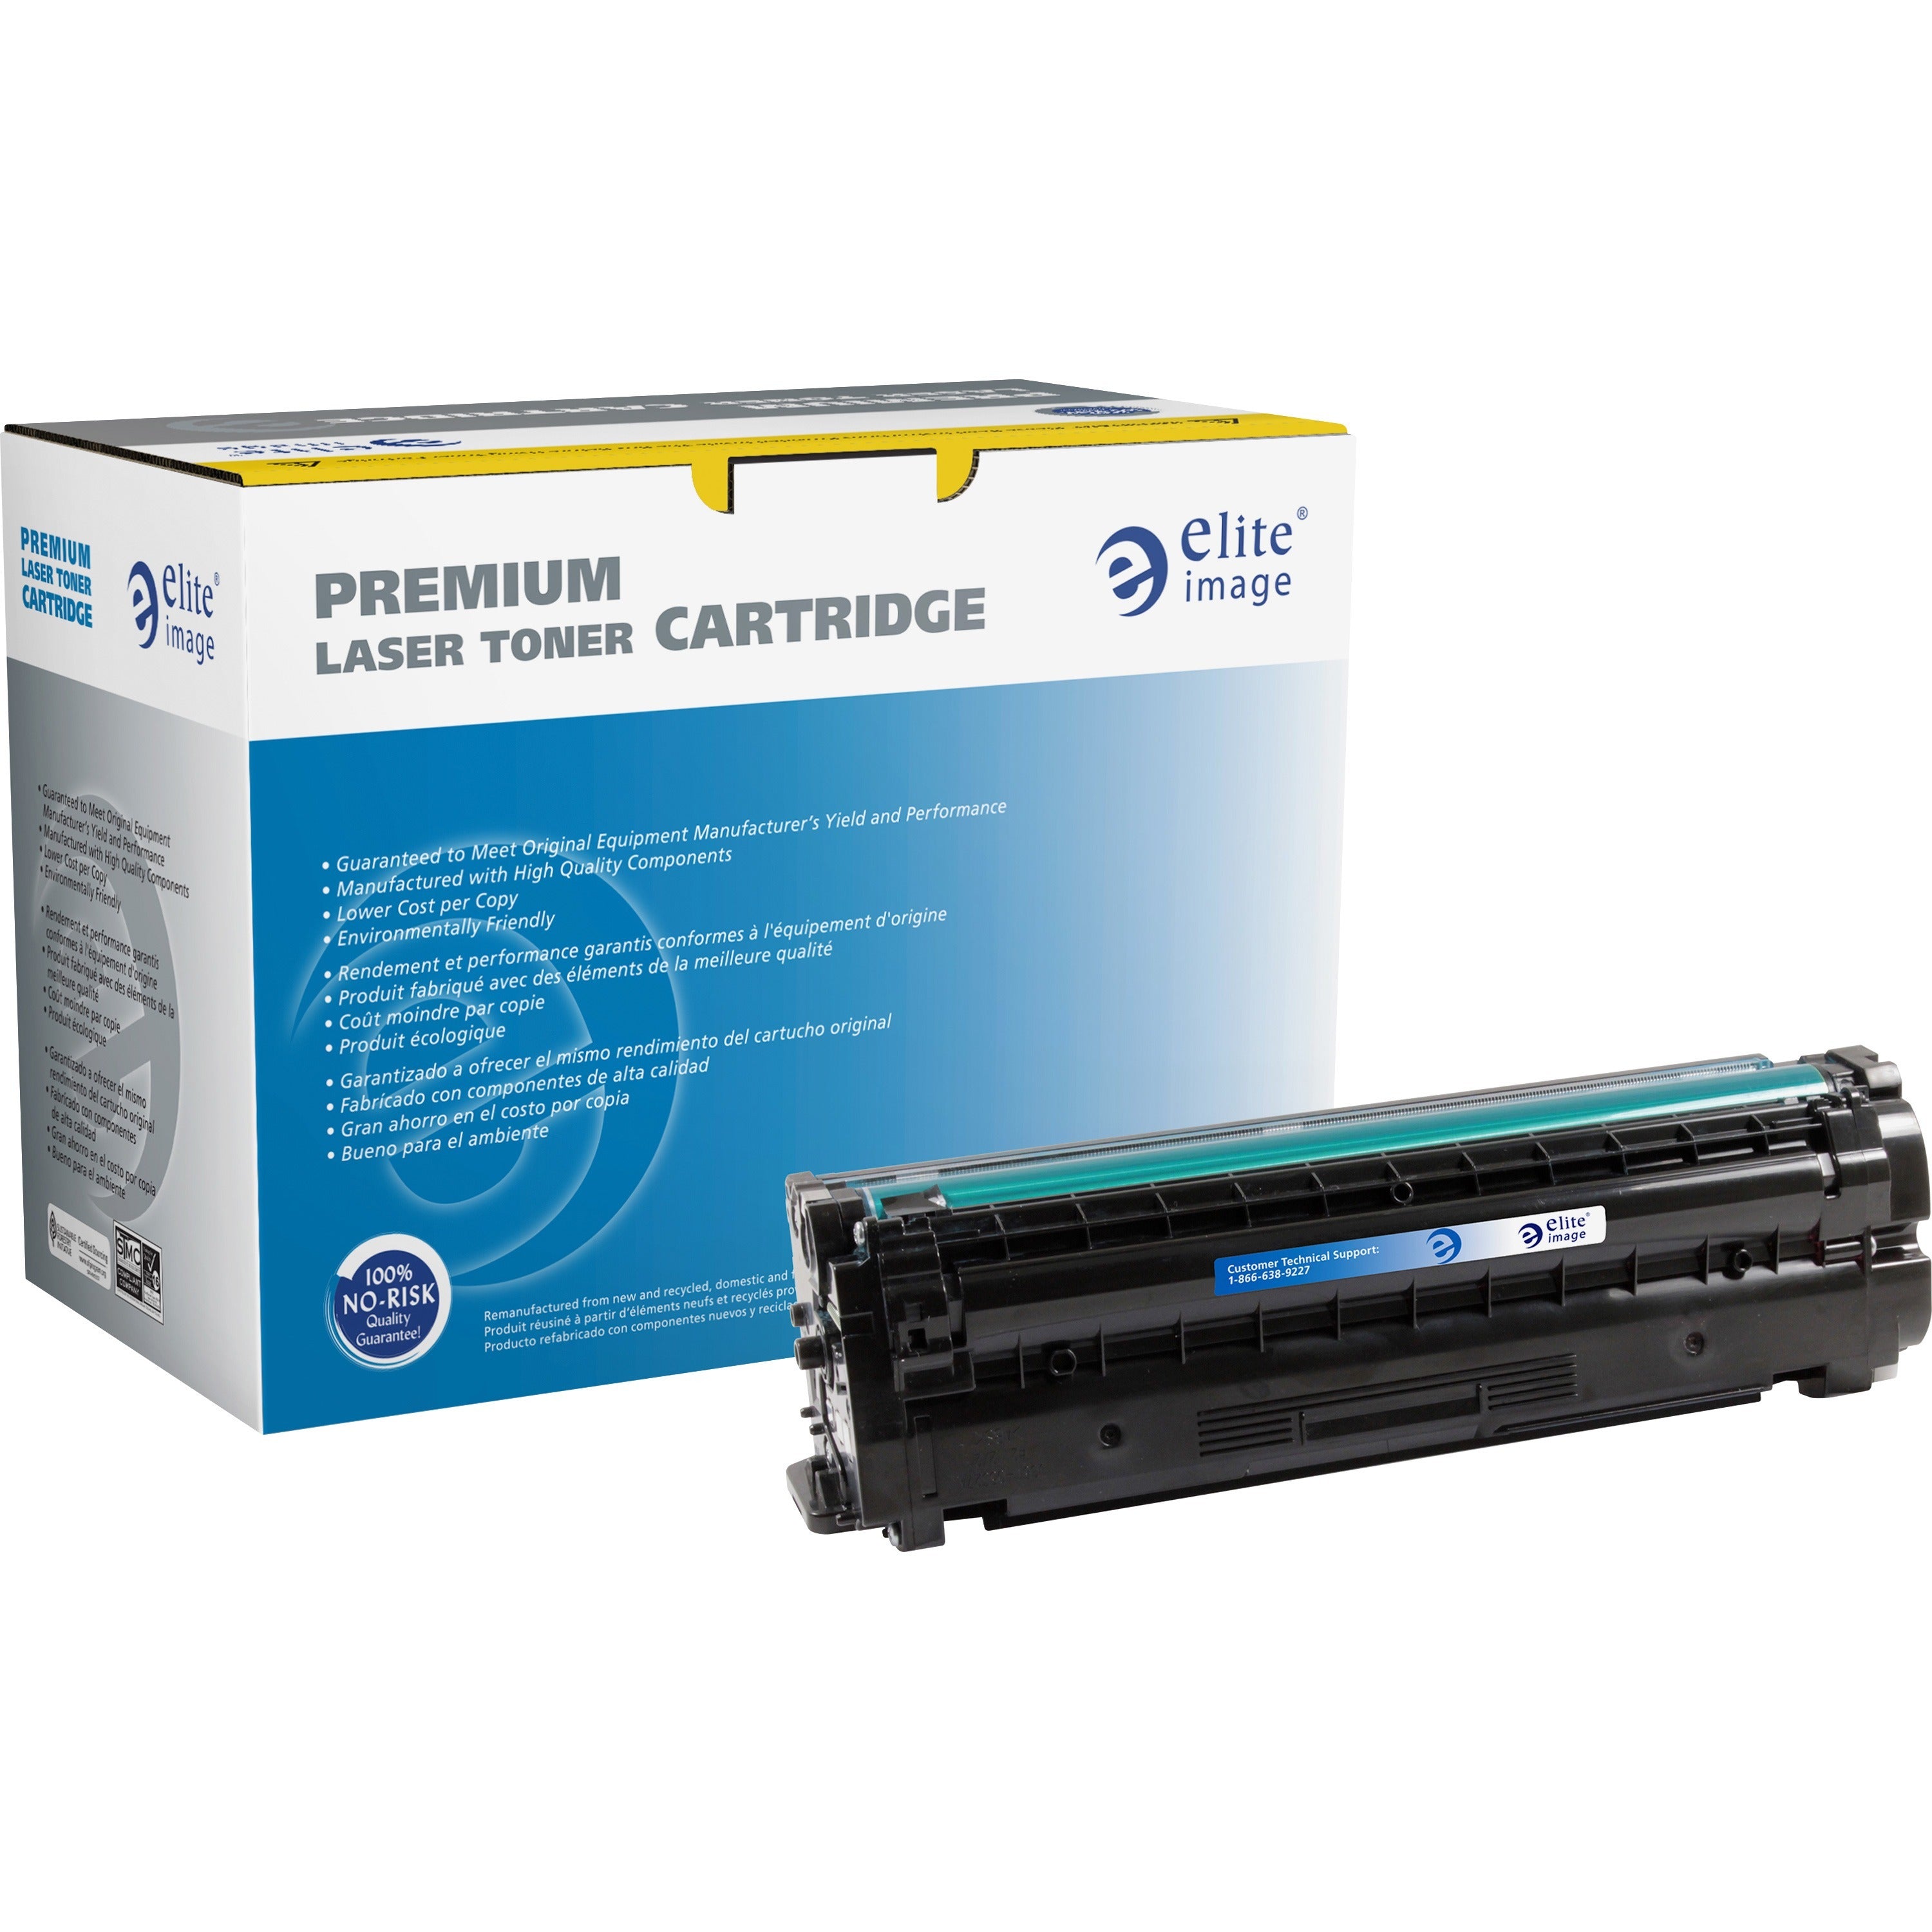 elite-image-remanufactured-high-yield-laser-toner-cartridge-alternative-for-samsung-cltc506l-cyan-1-each-3500-pages_eli76245 - 1